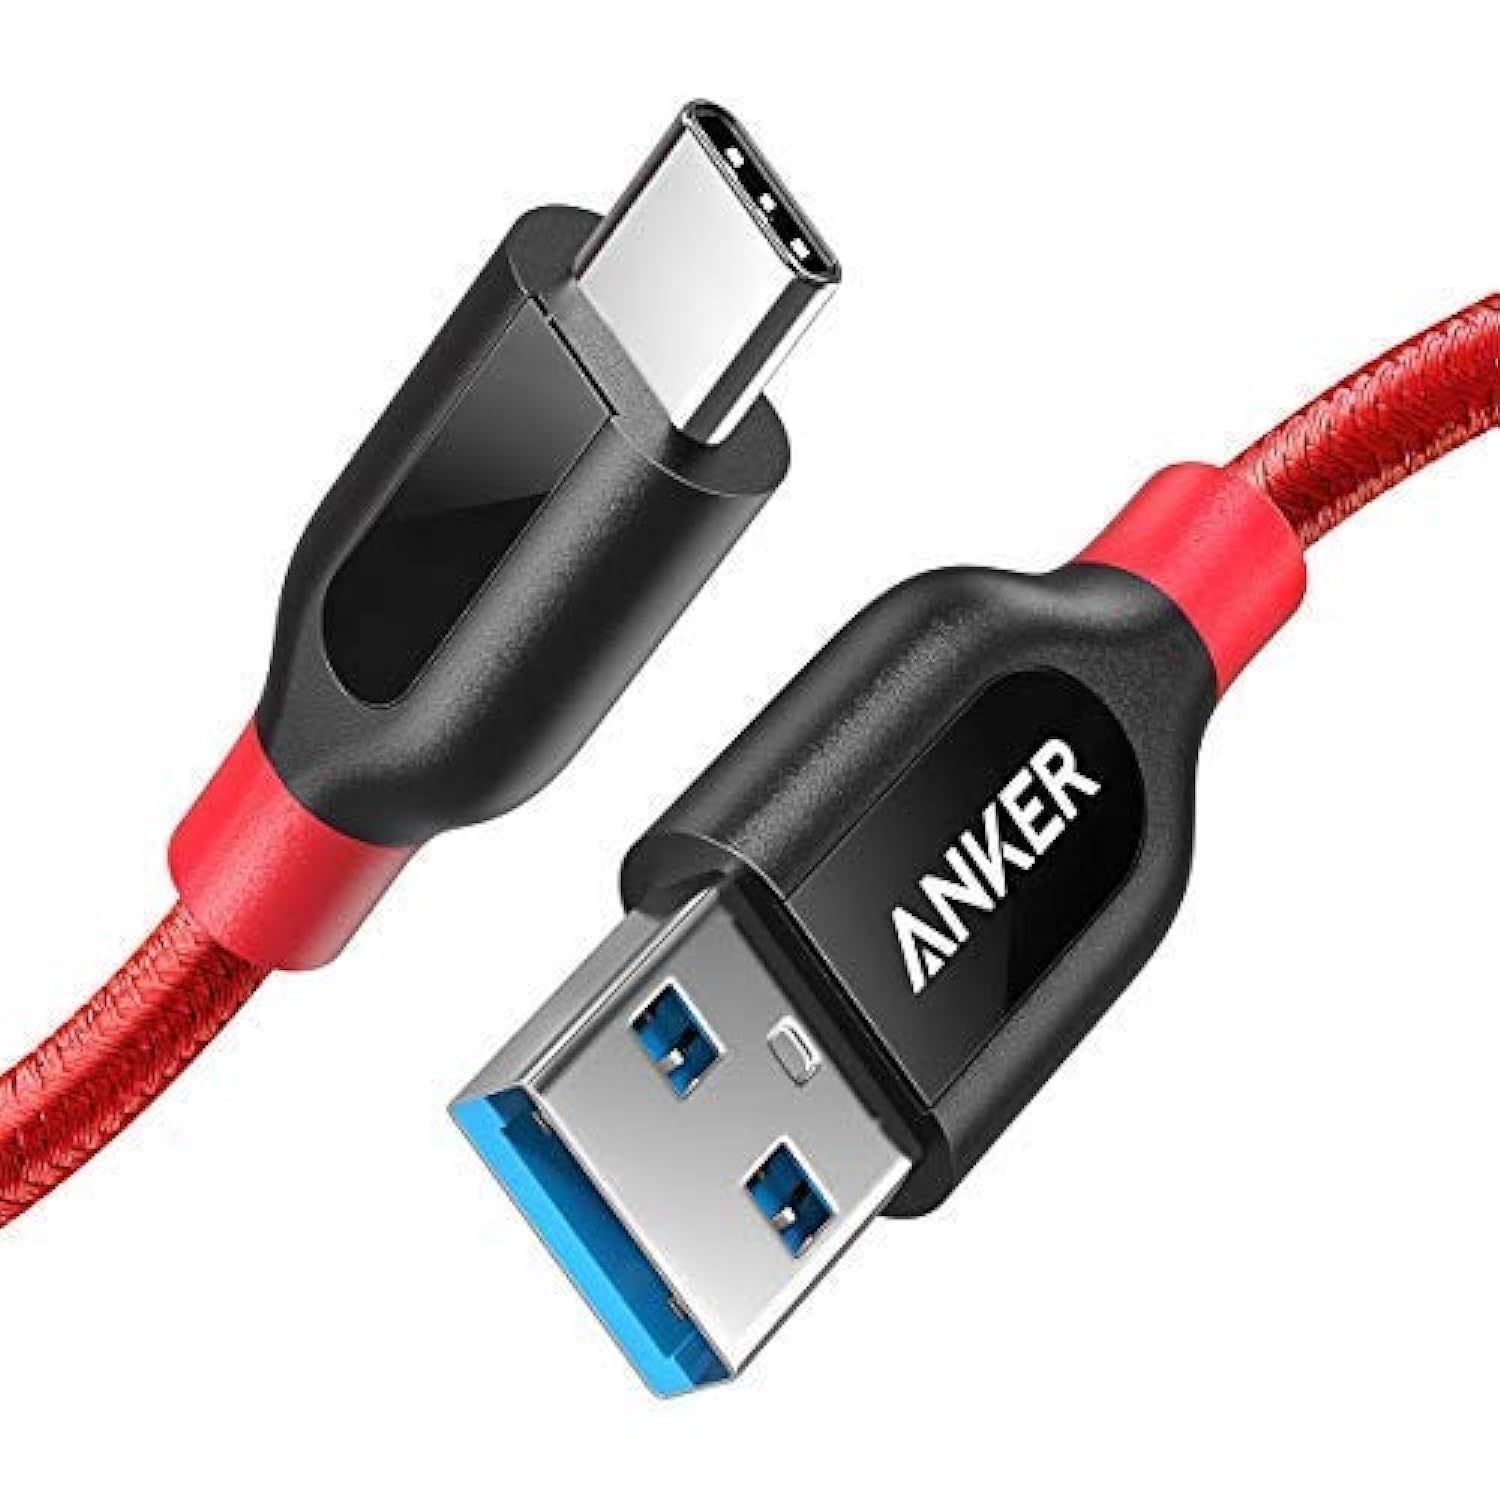 Anker USB C Cable, PowerLine+ USB-C to USB 3.0 cable (3ft/0.9m), High Durability - $37.99